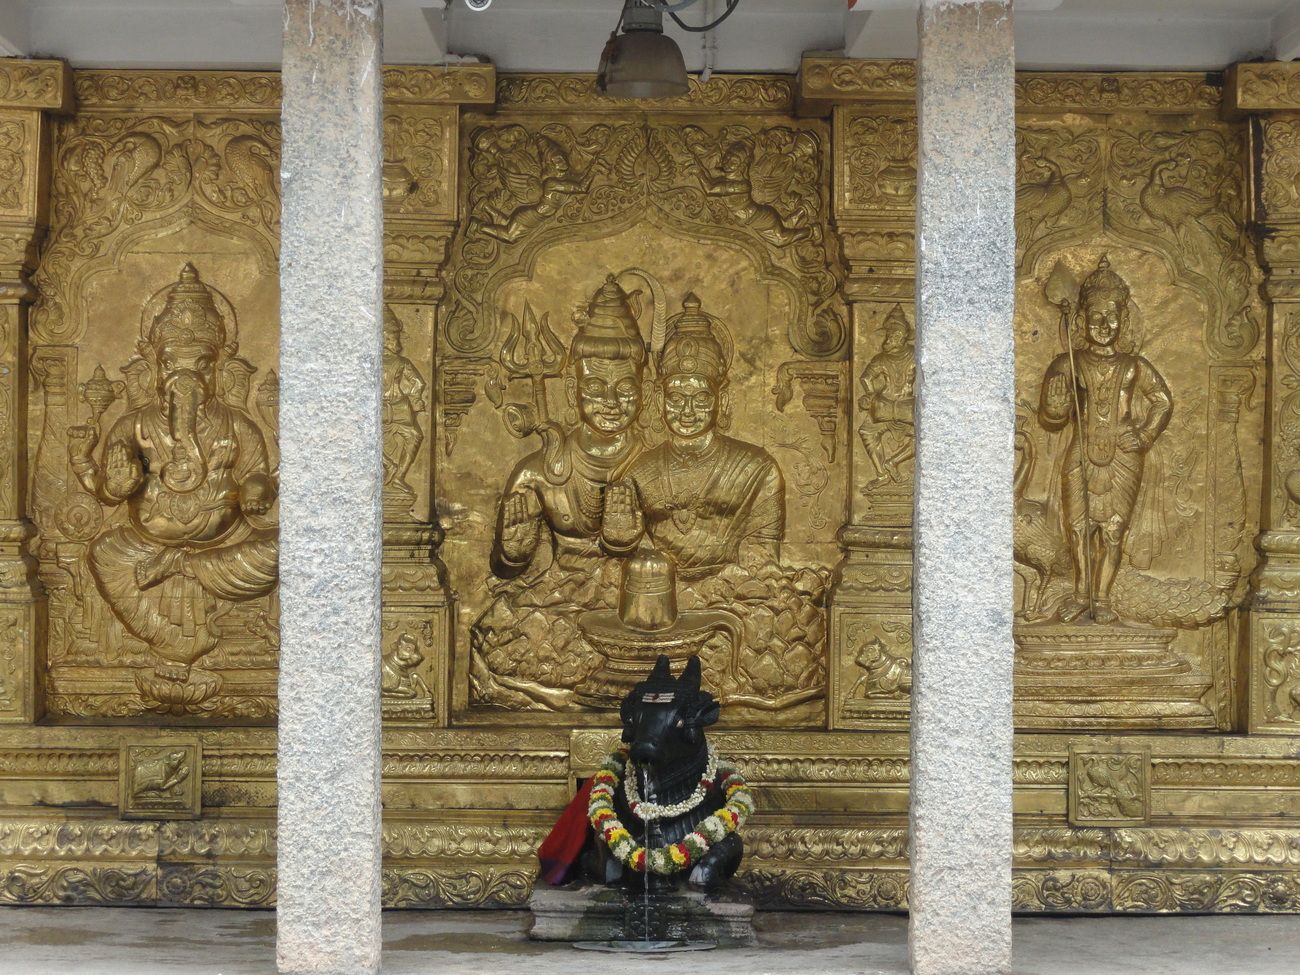 Sri Dakshinamukha Nandi Tirtha Kalyani Kshetra, Bengaluru. Amazing thing about the temple is that theertha (water) from the Nandi God's mouth is a wonder because it has been coming for more than a hundred years